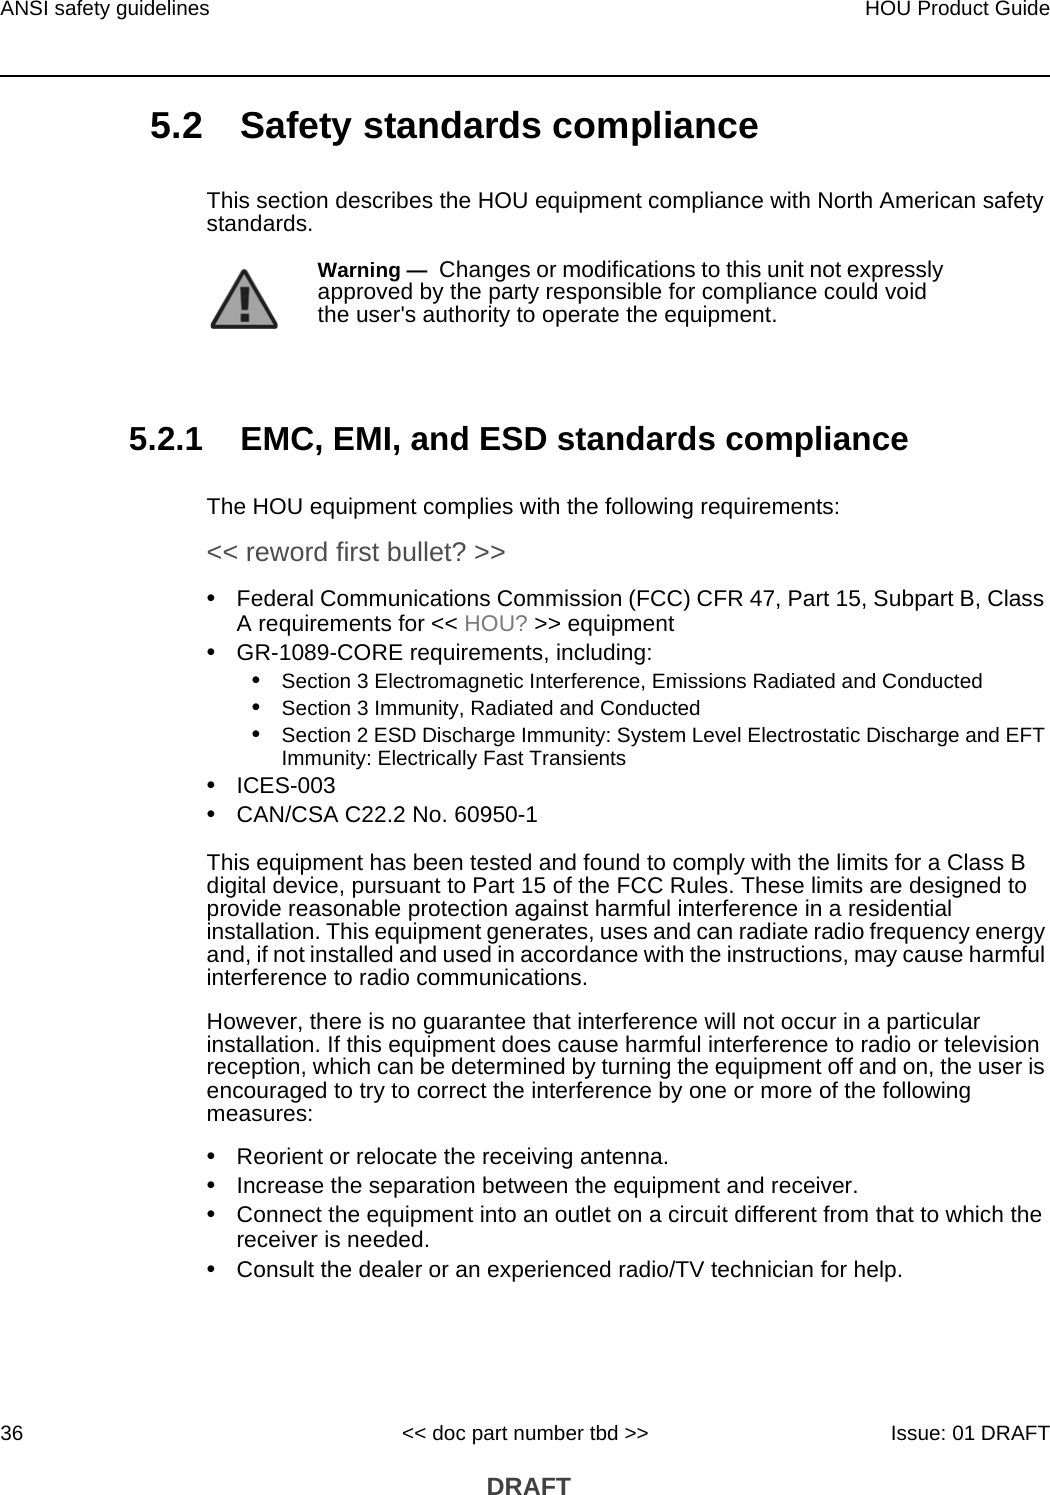 ANSI safety guidelines36HOU Product Guide&lt;&lt; doc part number tbd &gt;&gt; Issue: 01 DRAFT DRAFT5.2 Safety standards complianceThis section describes the HOU equipment compliance with North American safety standards.5.2.1 EMC, EMI, and ESD standards complianceThe HOU equipment complies with the following requirements:&lt;&lt; reword first bullet? &gt;&gt;•Federal Communications Commission (FCC) CFR 47, Part 15, Subpart B, Class A requirements for &lt;&lt; HOU? &gt;&gt; equipment•GR-1089-CORE requirements, including:•Section 3 Electromagnetic Interference, Emissions Radiated and Conducted•Section 3 Immunity, Radiated and Conducted•Section 2 ESD Discharge Immunity: System Level Electrostatic Discharge and EFT Immunity: Electrically Fast Transients•ICES-003•CAN/CSA C22.2 No. 60950-1This equipment has been tested and found to comply with the limits for a Class B digital device, pursuant to Part 15 of the FCC Rules. These limits are designed to provide reasonable protection against harmful interference in a residential installation. This equipment generates, uses and can radiate radio frequency energy and, if not installed and used in accordance with the instructions, may cause harmful interference to radio communications.However, there is no guarantee that interference will not occur in a particular installation. If this equipment does cause harmful interference to radio or television reception, which can be determined by turning the equipment off and on, the user is encouraged to try to correct the interference by one or more of the following measures:•Reorient or relocate the receiving antenna.•Increase the separation between the equipment and receiver.•Connect the equipment into an outlet on a circuit different from that to which the receiver is needed.•Consult the dealer or an experienced radio/TV technician for help.Warning —  Changes or modifications to this unit not expressly approved by the party responsible for compliance could void the user&apos;s authority to operate the equipment.